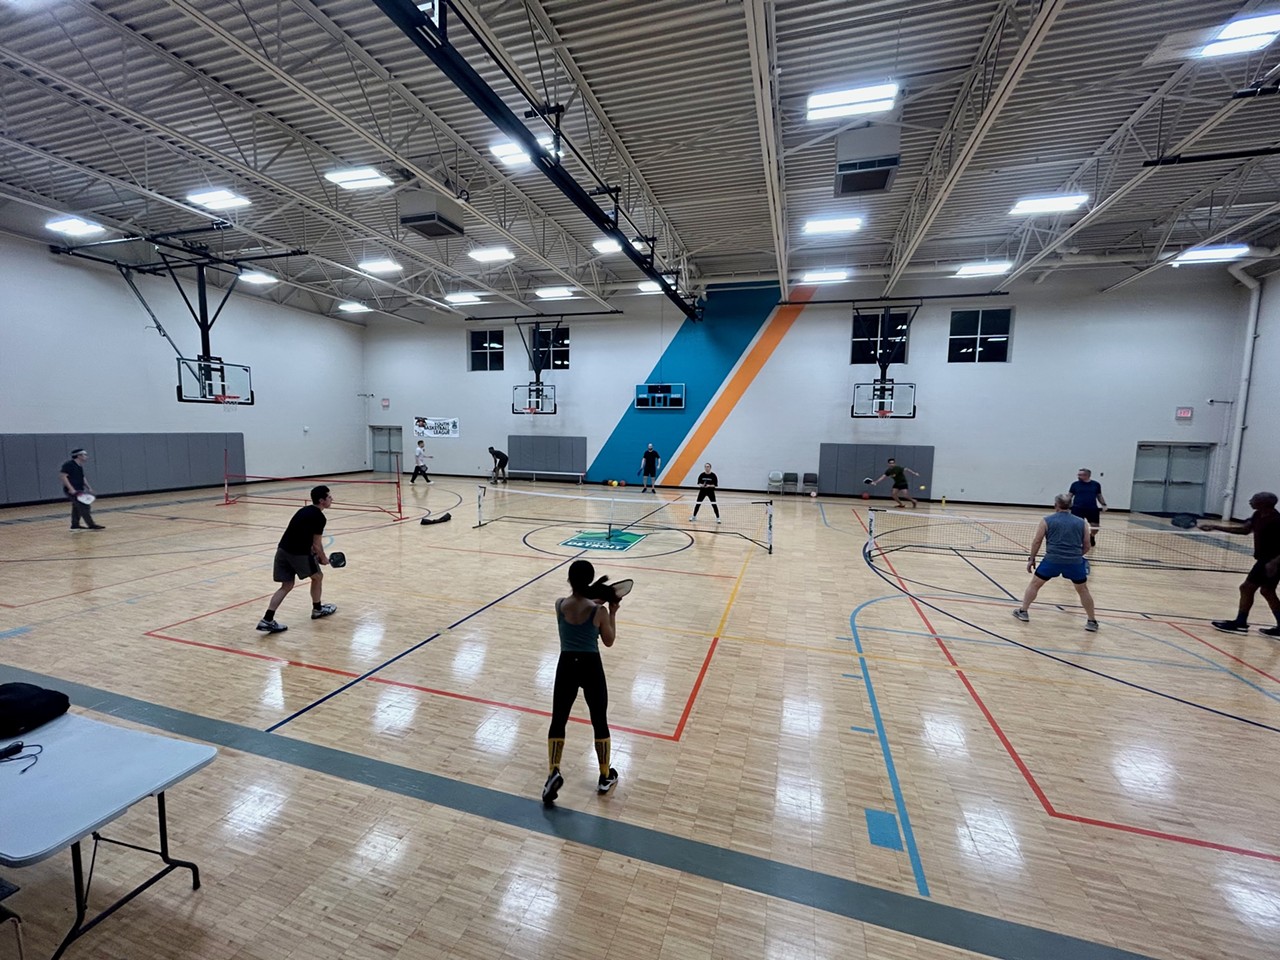 Kemeny Recreation Center
2260 S. Fort St., Detroit; 313-628-2819; detroit.mi.gov
Renovated and enlarged in 2010, Kemeny Recreation Center offers drop-in pickleball on Wednesdays from 6-8 p.m. and Saturdays from 4-6 p.m. There are three courts inside the gymnasium. The schedule often changes, so call to confirm.